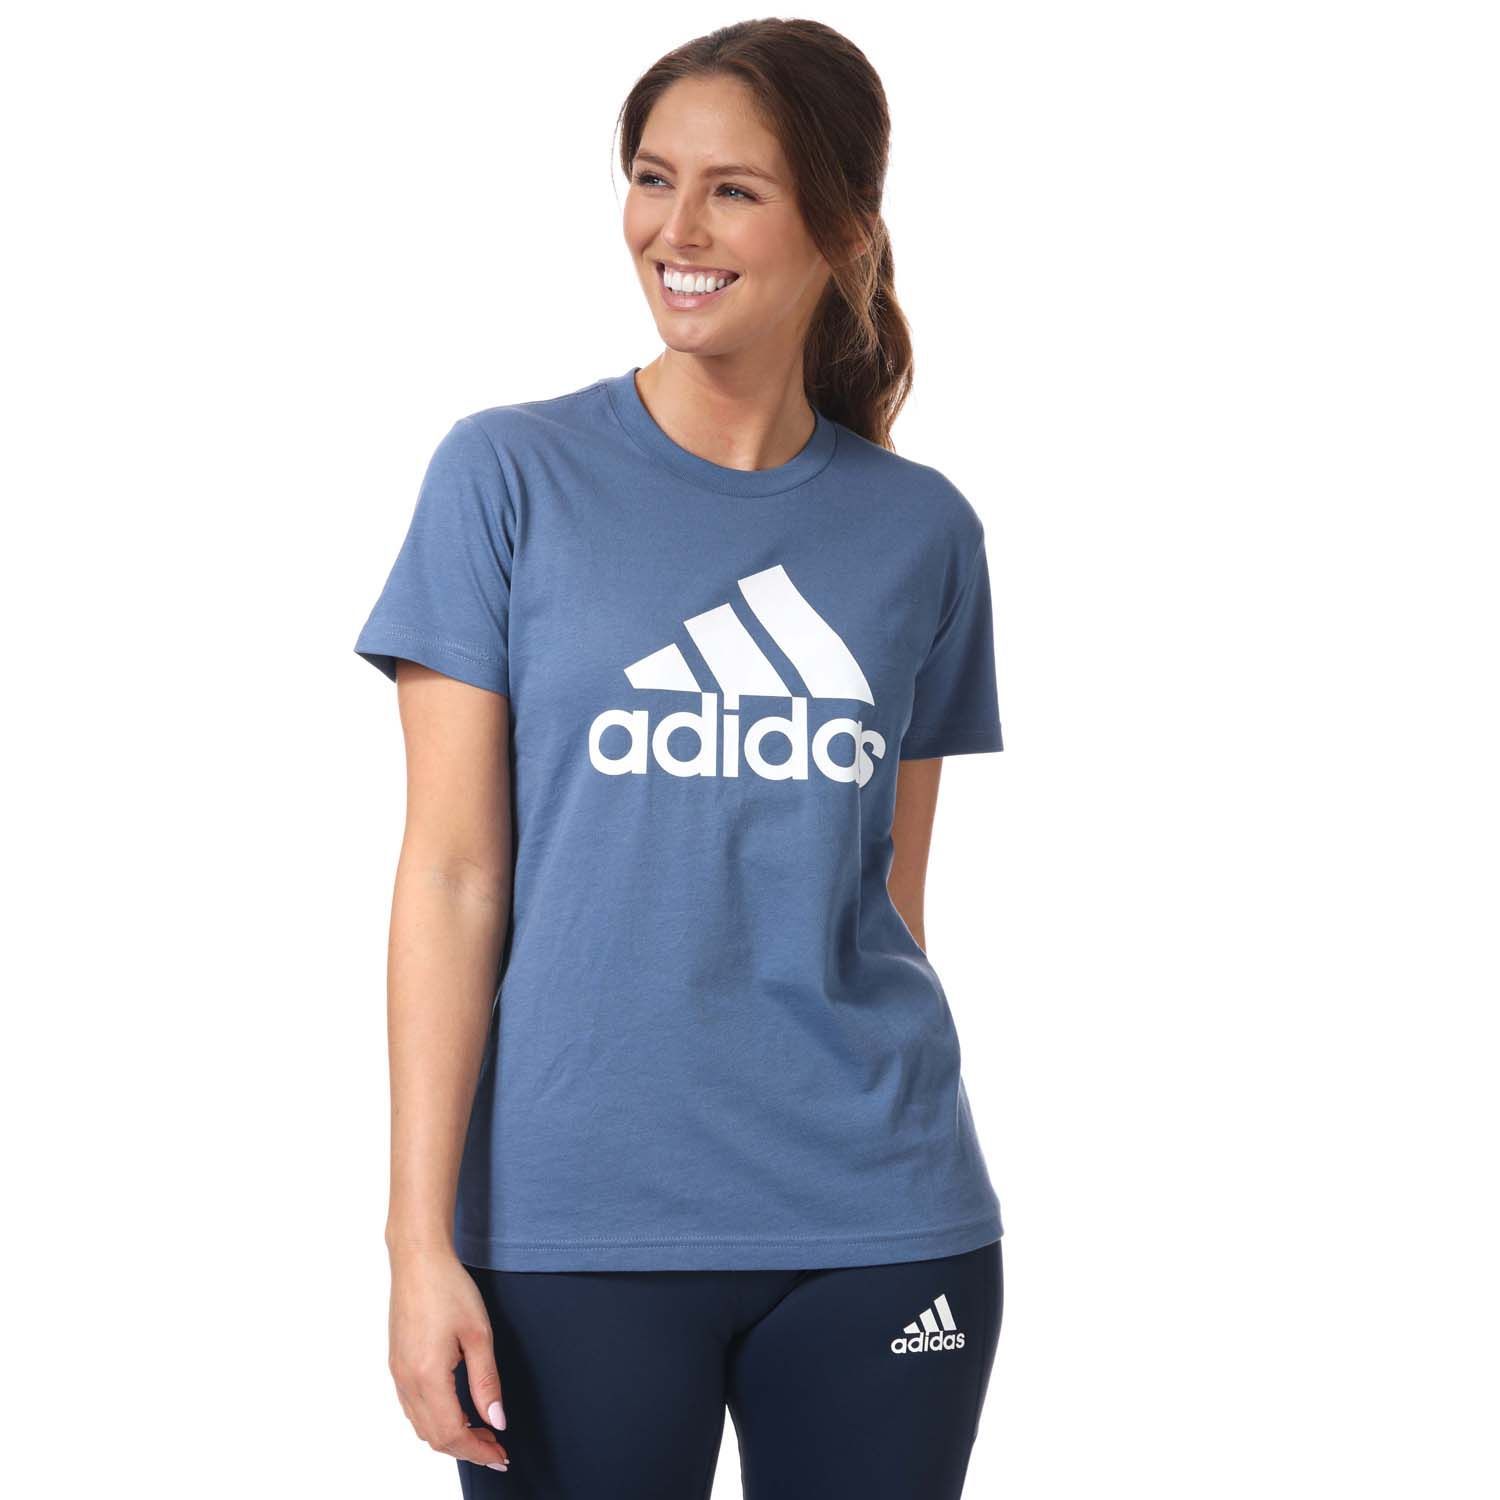 Womens adidas LOUNGEWEAR Essentials Logo T- Shirt in blue- white.- Crewneck.- Short sleeves.- Oversized adidas Badge of Sport logo across the chest.- Regular fit.- Main material: 100% Cotton. Machine washable. - Ref: GL0728